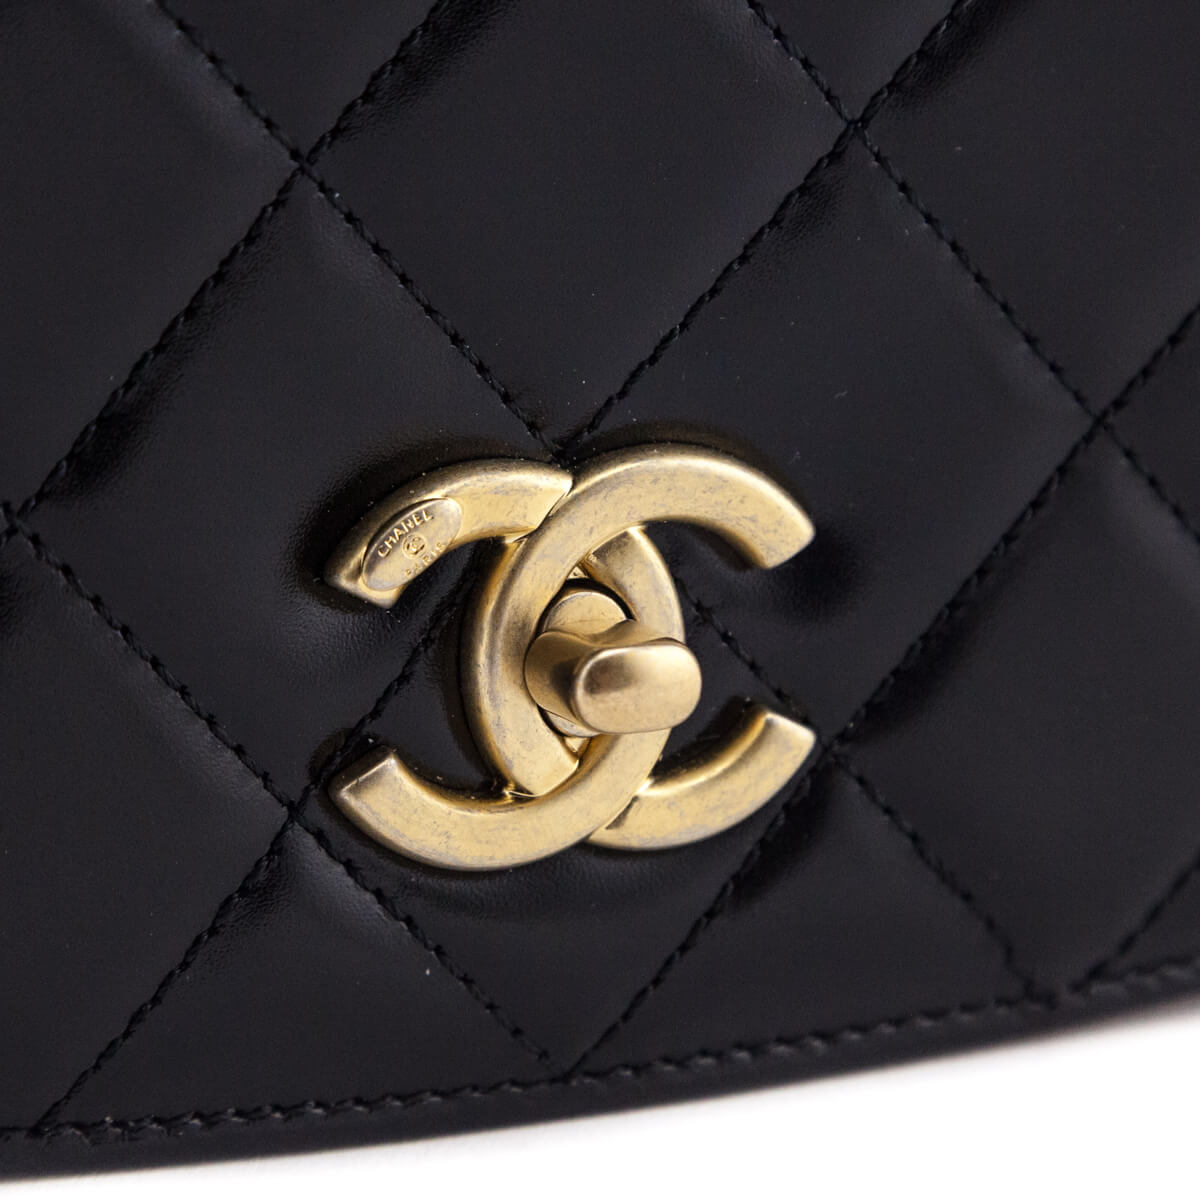 Chanel Black Quilted Shiny Calfskin & Suede Mini Messenger Bag – Love that  Bag etc - Preowned Designer Fashions